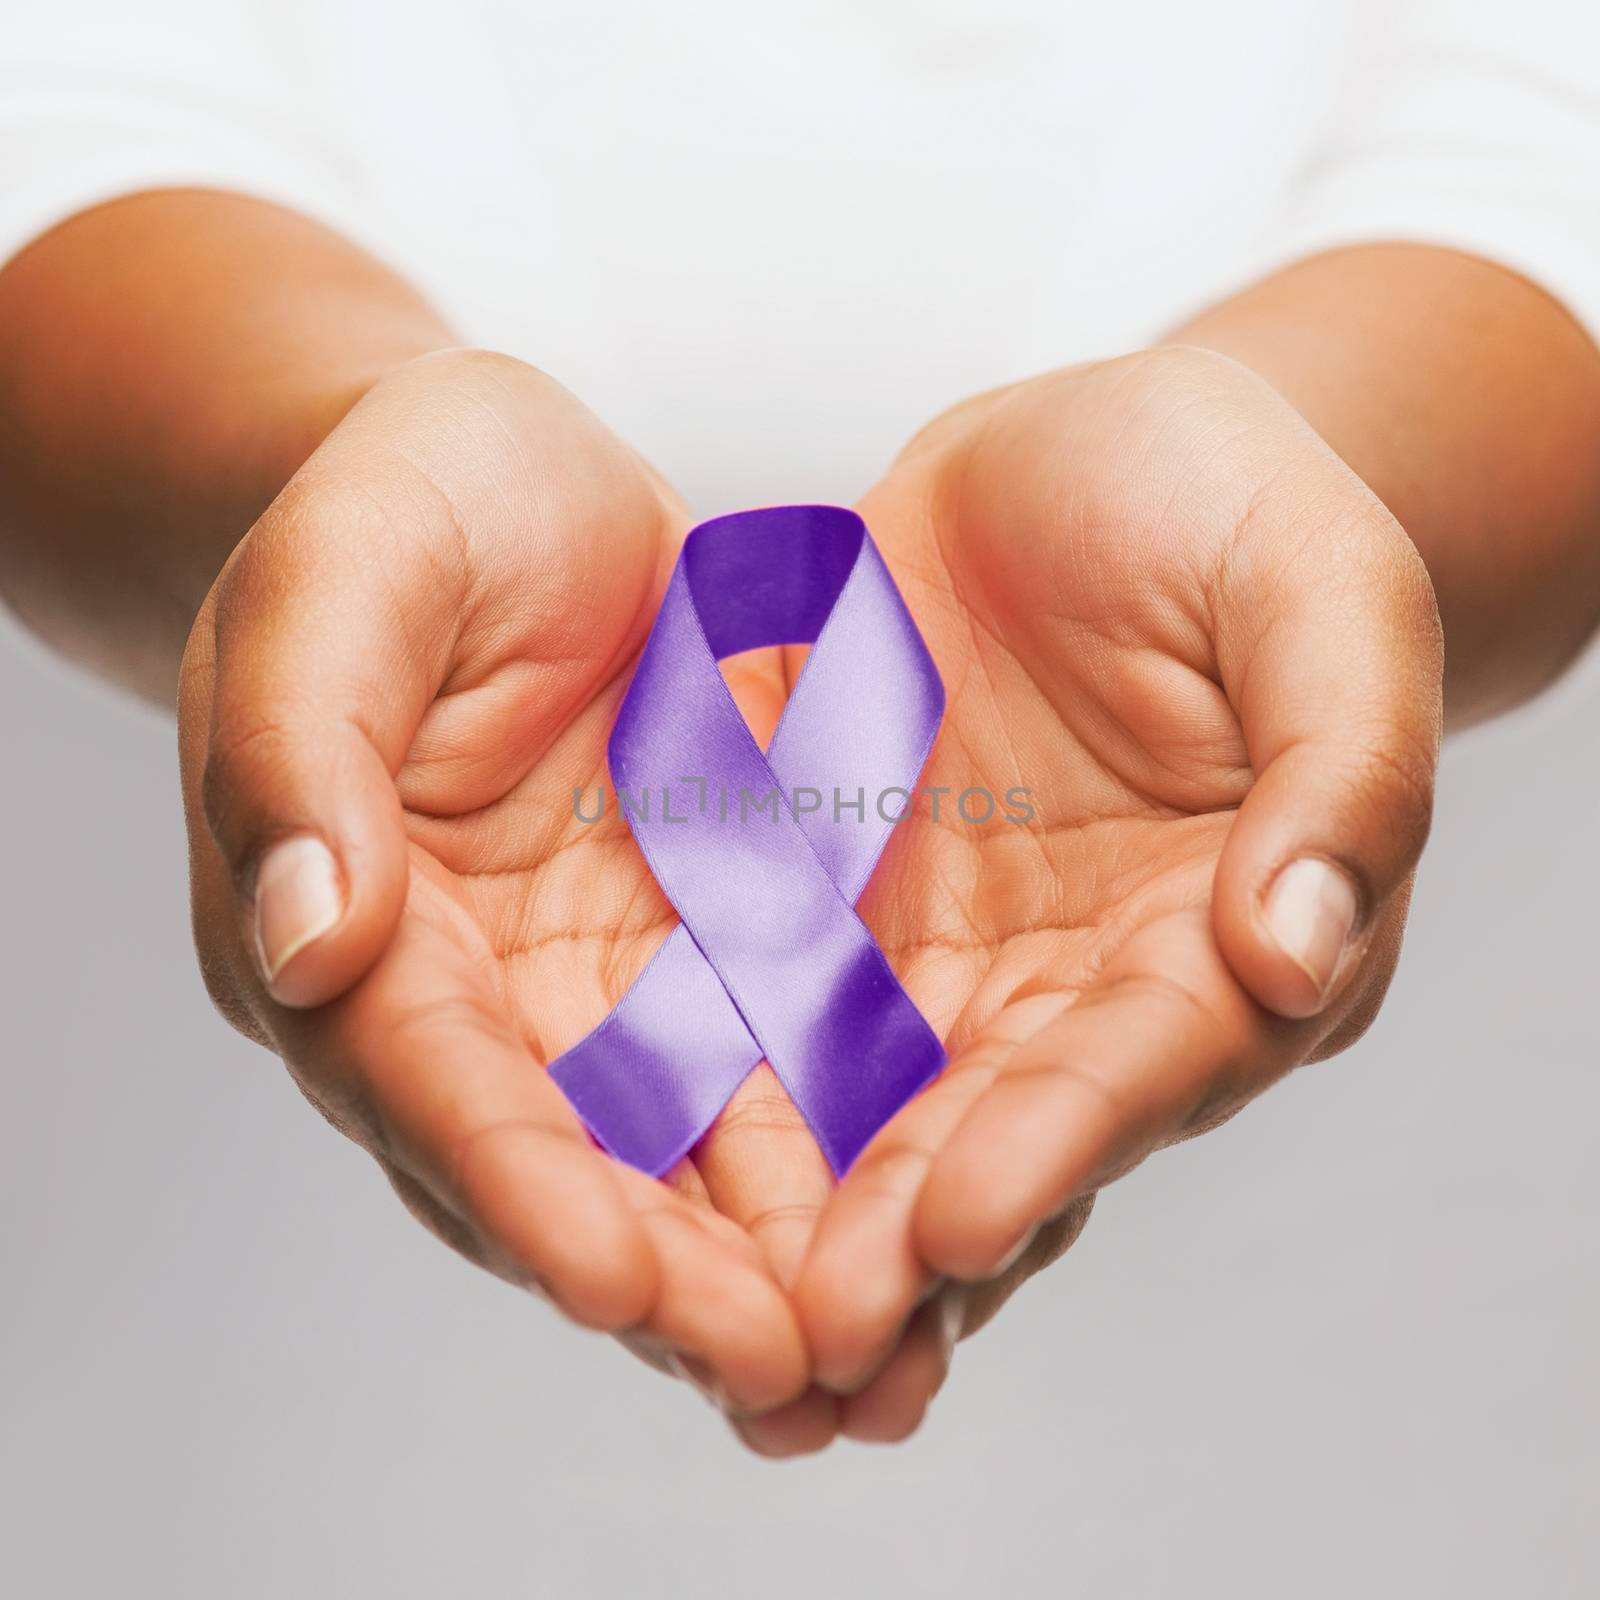 healthcare and social problem concept - womans hands holding purple domestic violence awareness ribbon